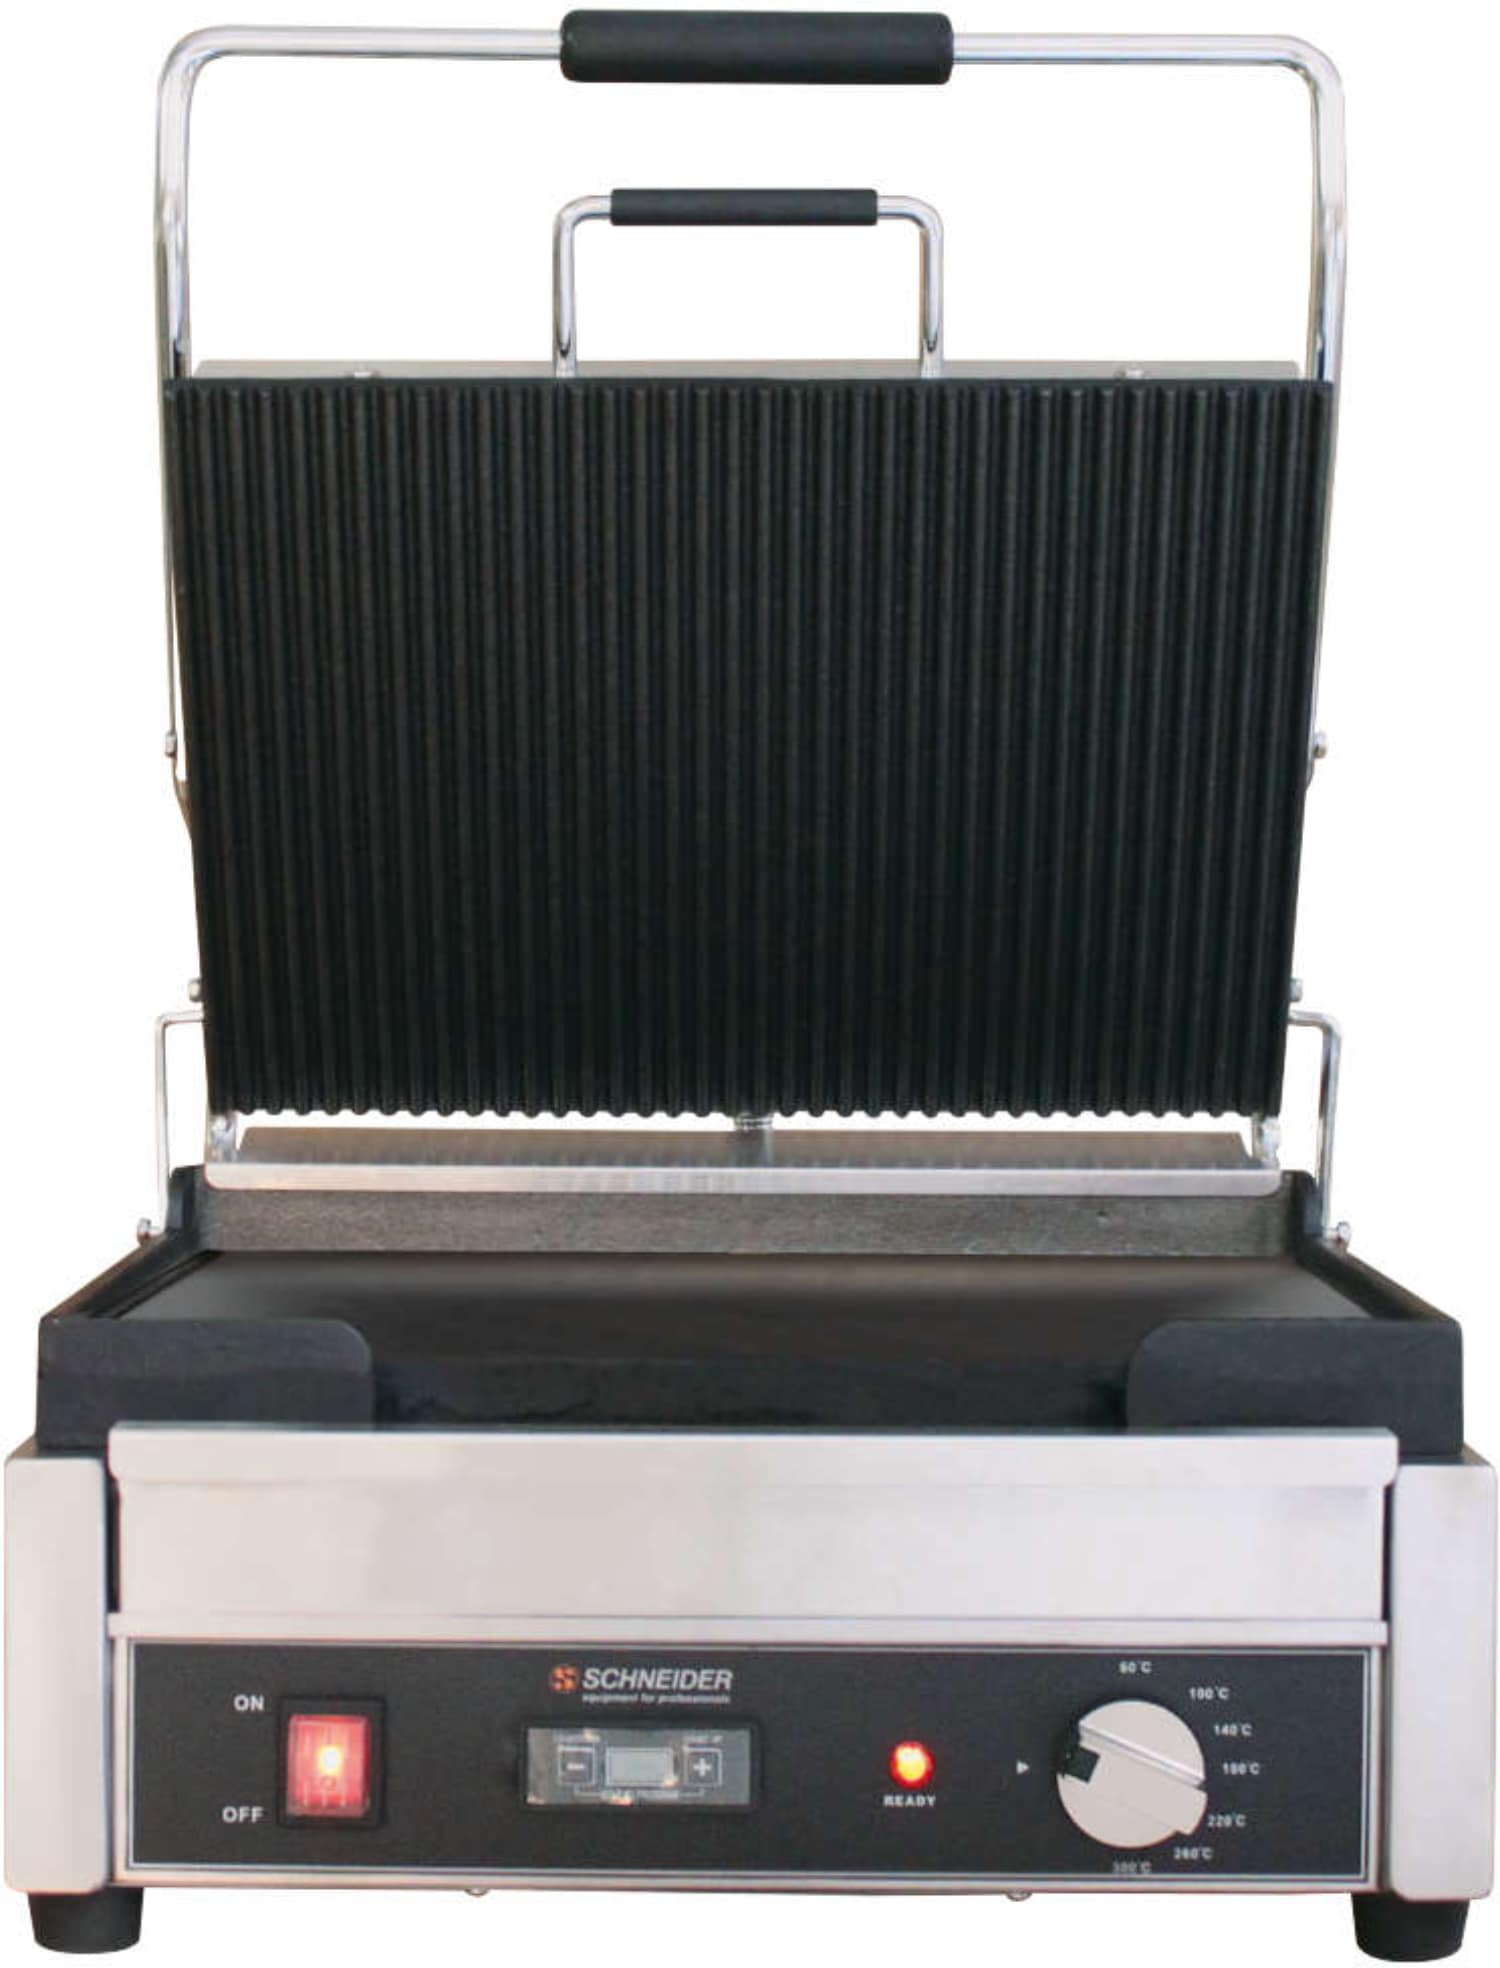 Contact grill large "ribbed / flat" 150930